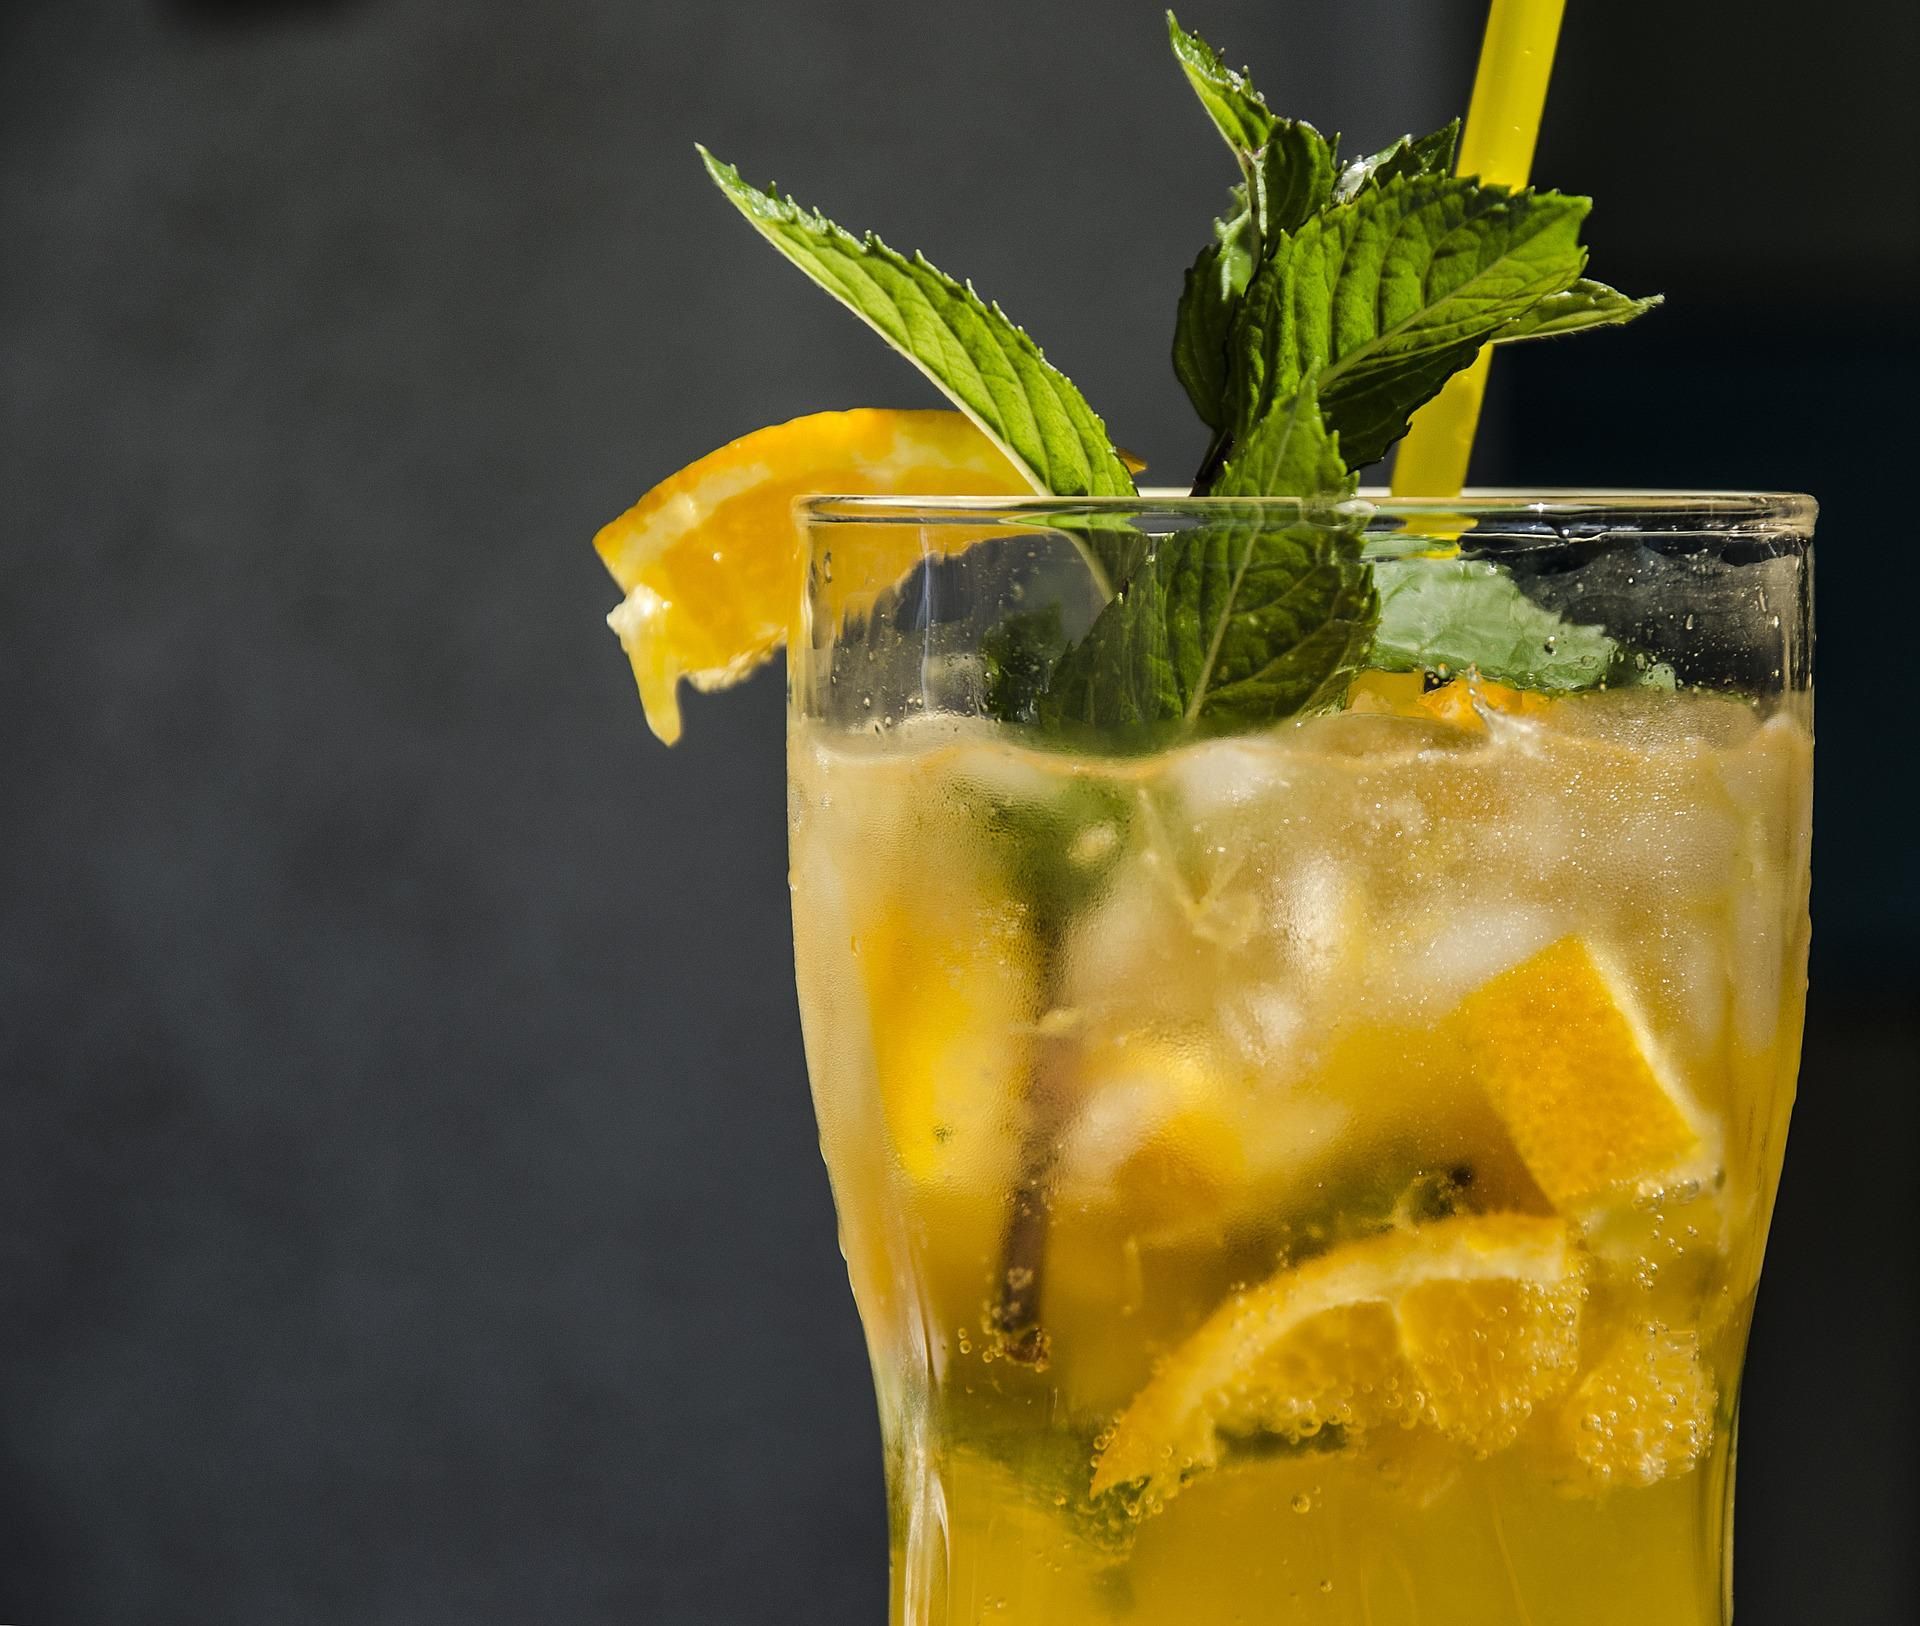 Cocktail Tips: How To Make Shrubs